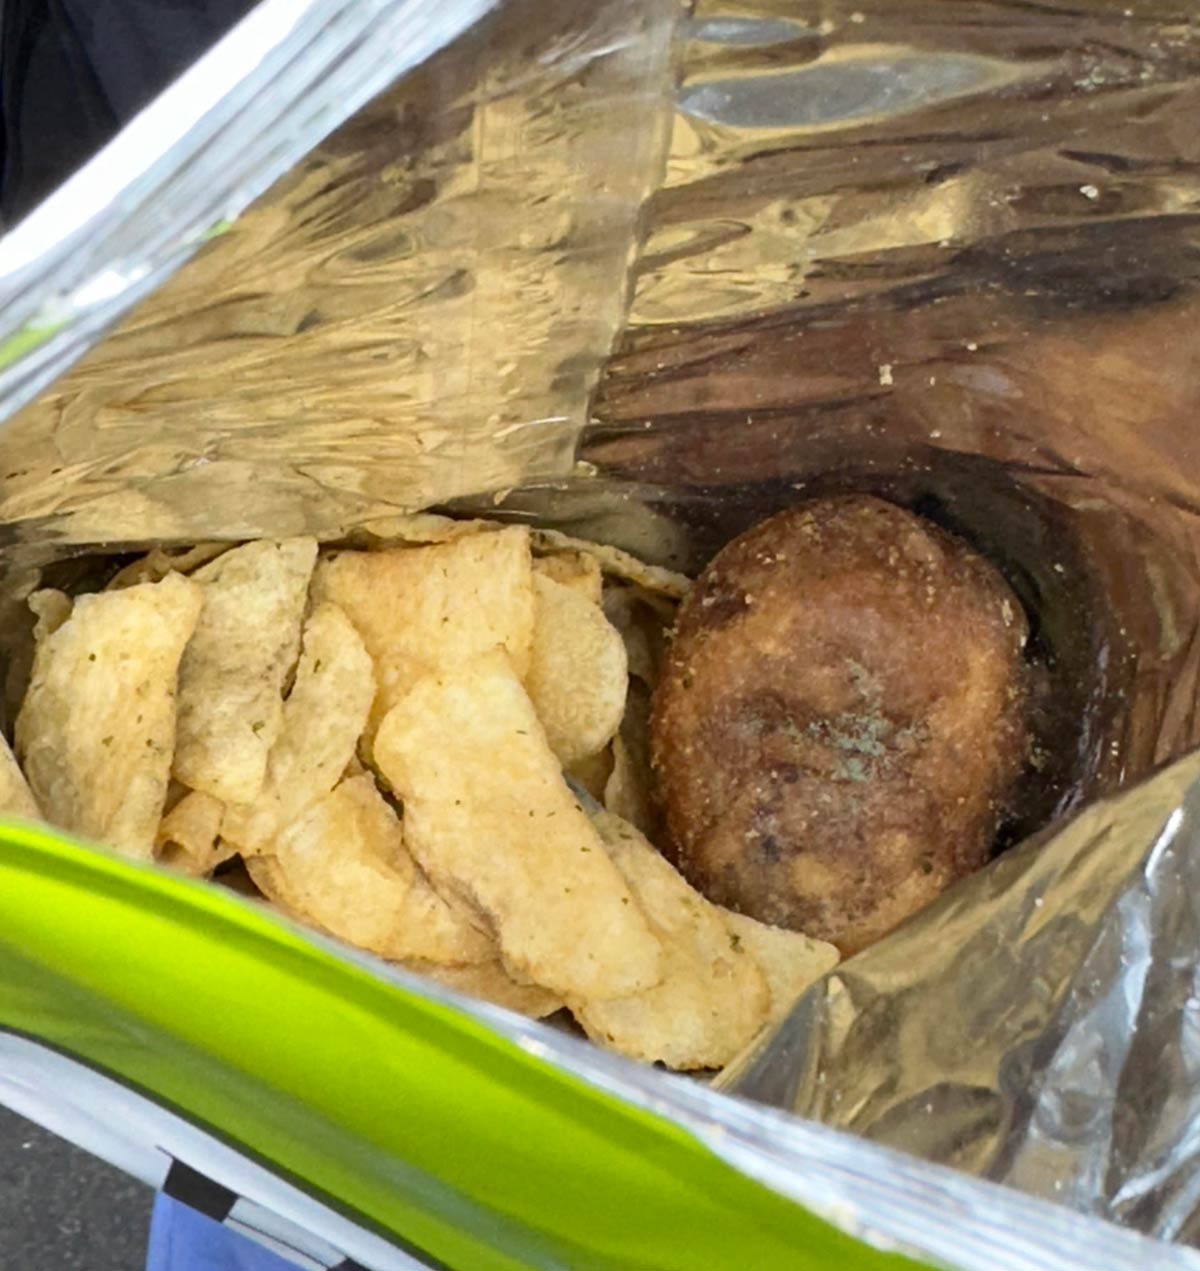 This whole potato made it into my bag of chips